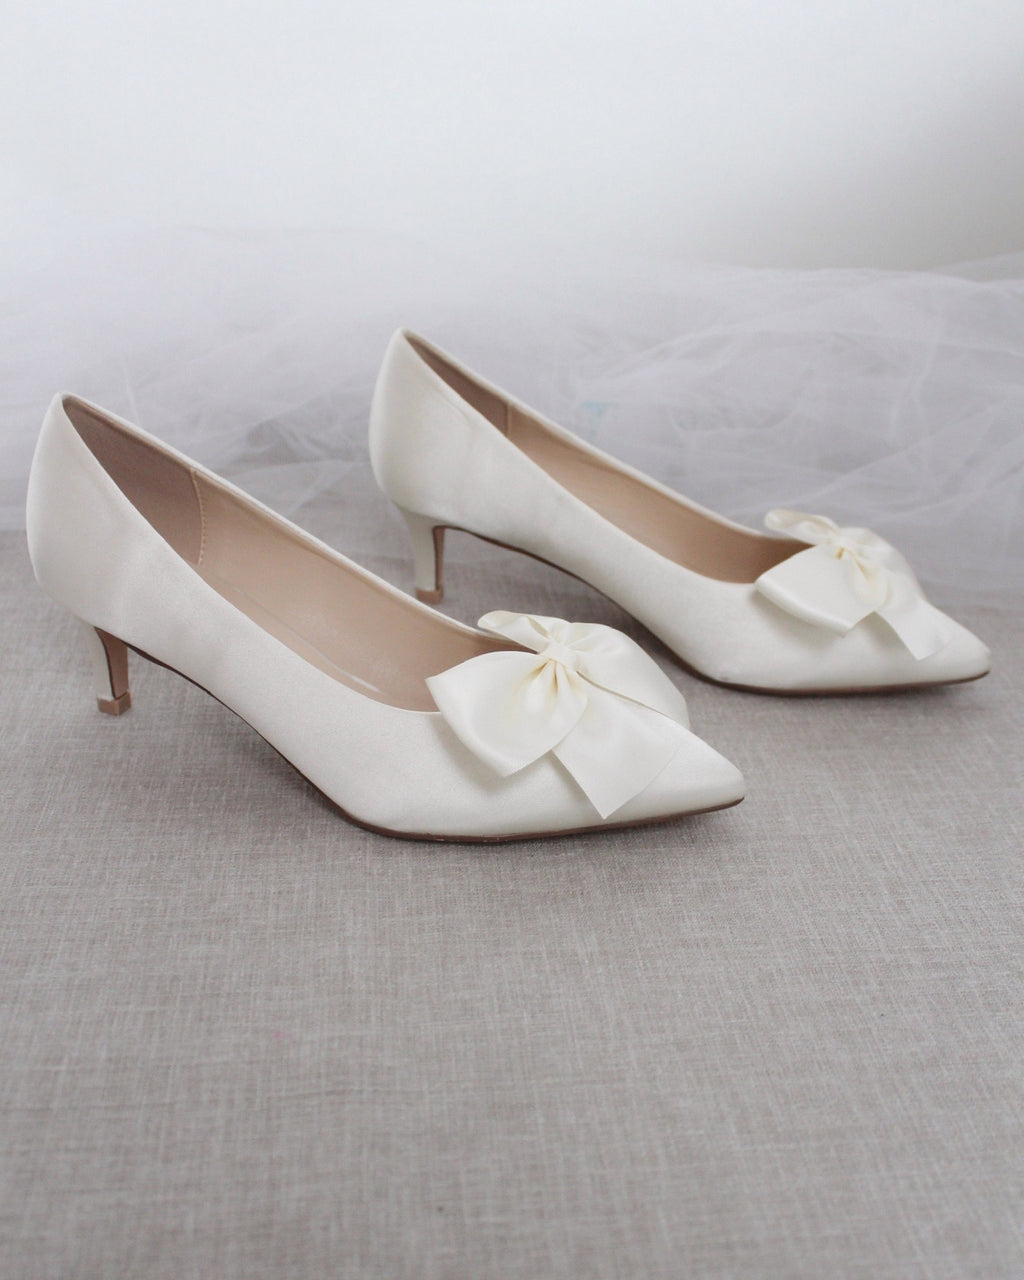 Ivory Satin Pointy Toe Pump Low Heel with Satin Bow - Bridesmaid Shoes ...